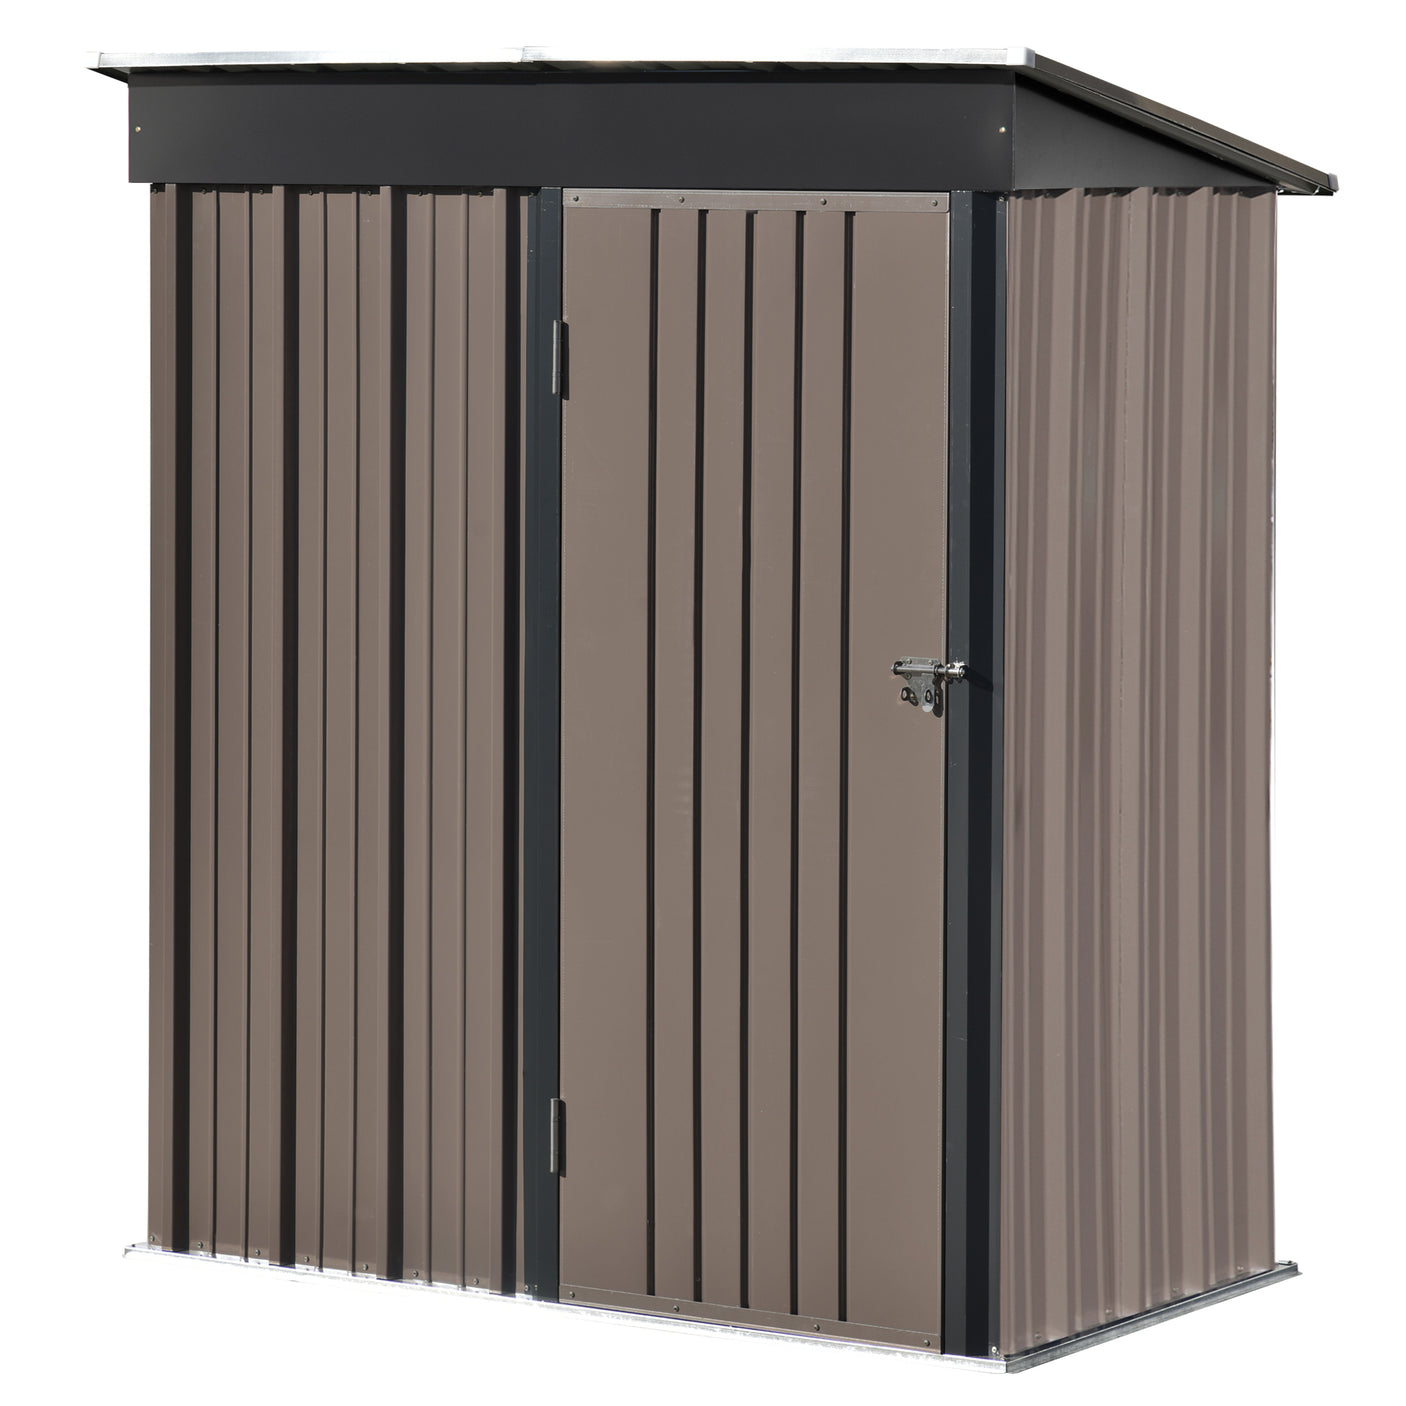 TOPMAX Patio 5ft Wx3ft. L Garden Shed, Metal Lean-to Storage Shed with Lockable Door, Tool Cabinet for Backyard, Lawn, Garden, Brown